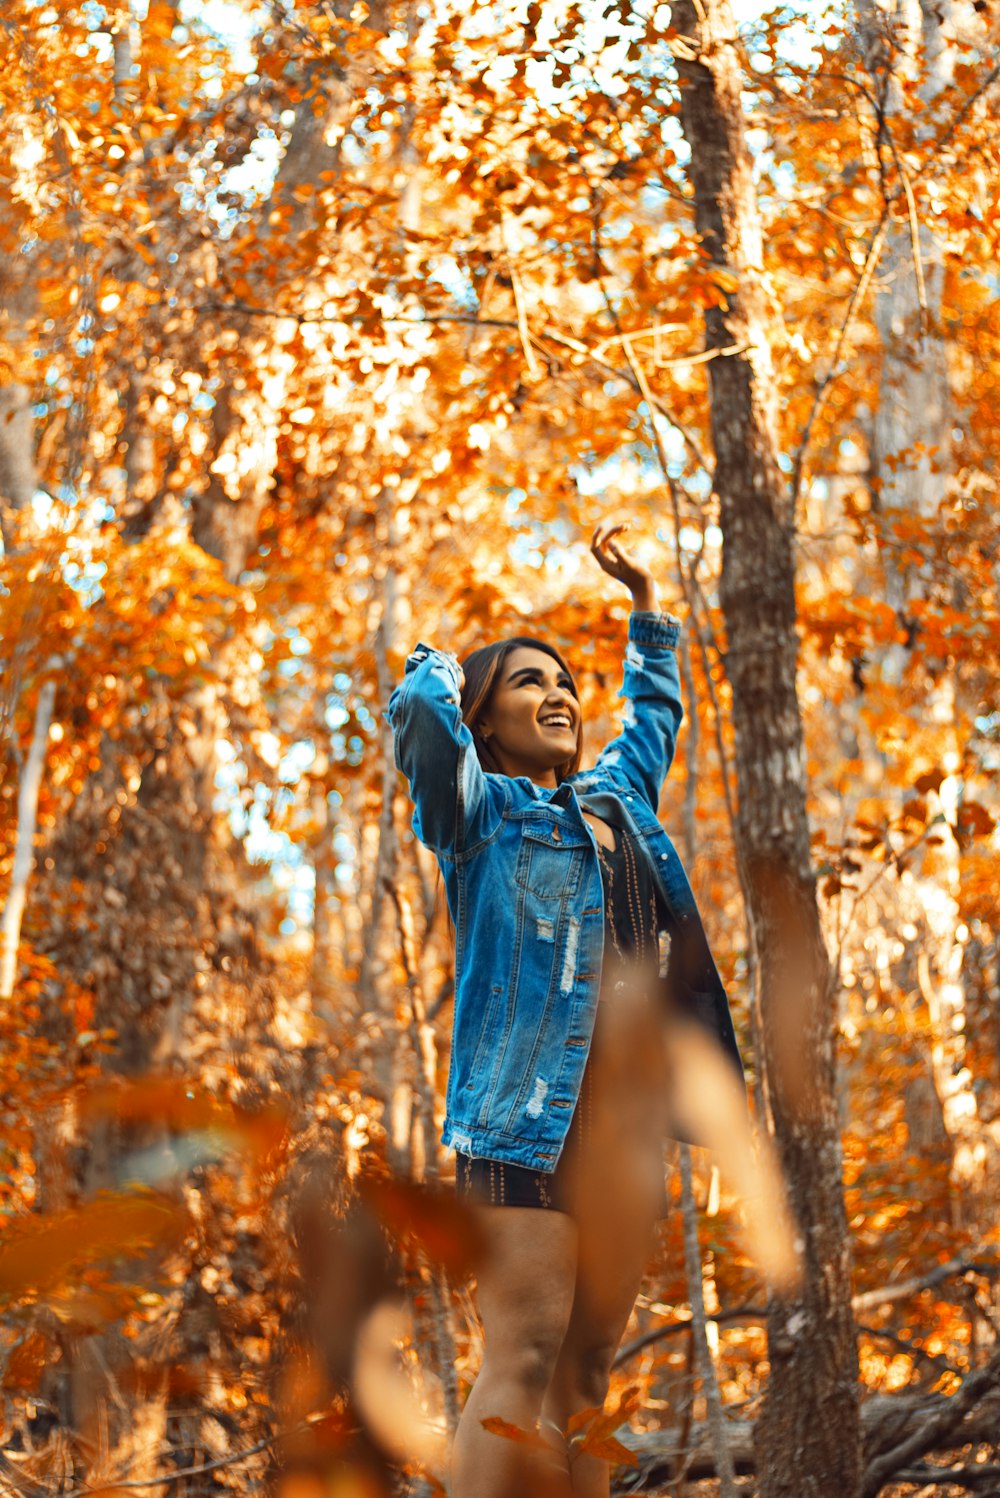 smiling woman wearing blue denim jacket standing while raising both hands surrounded with orange trees during daytime